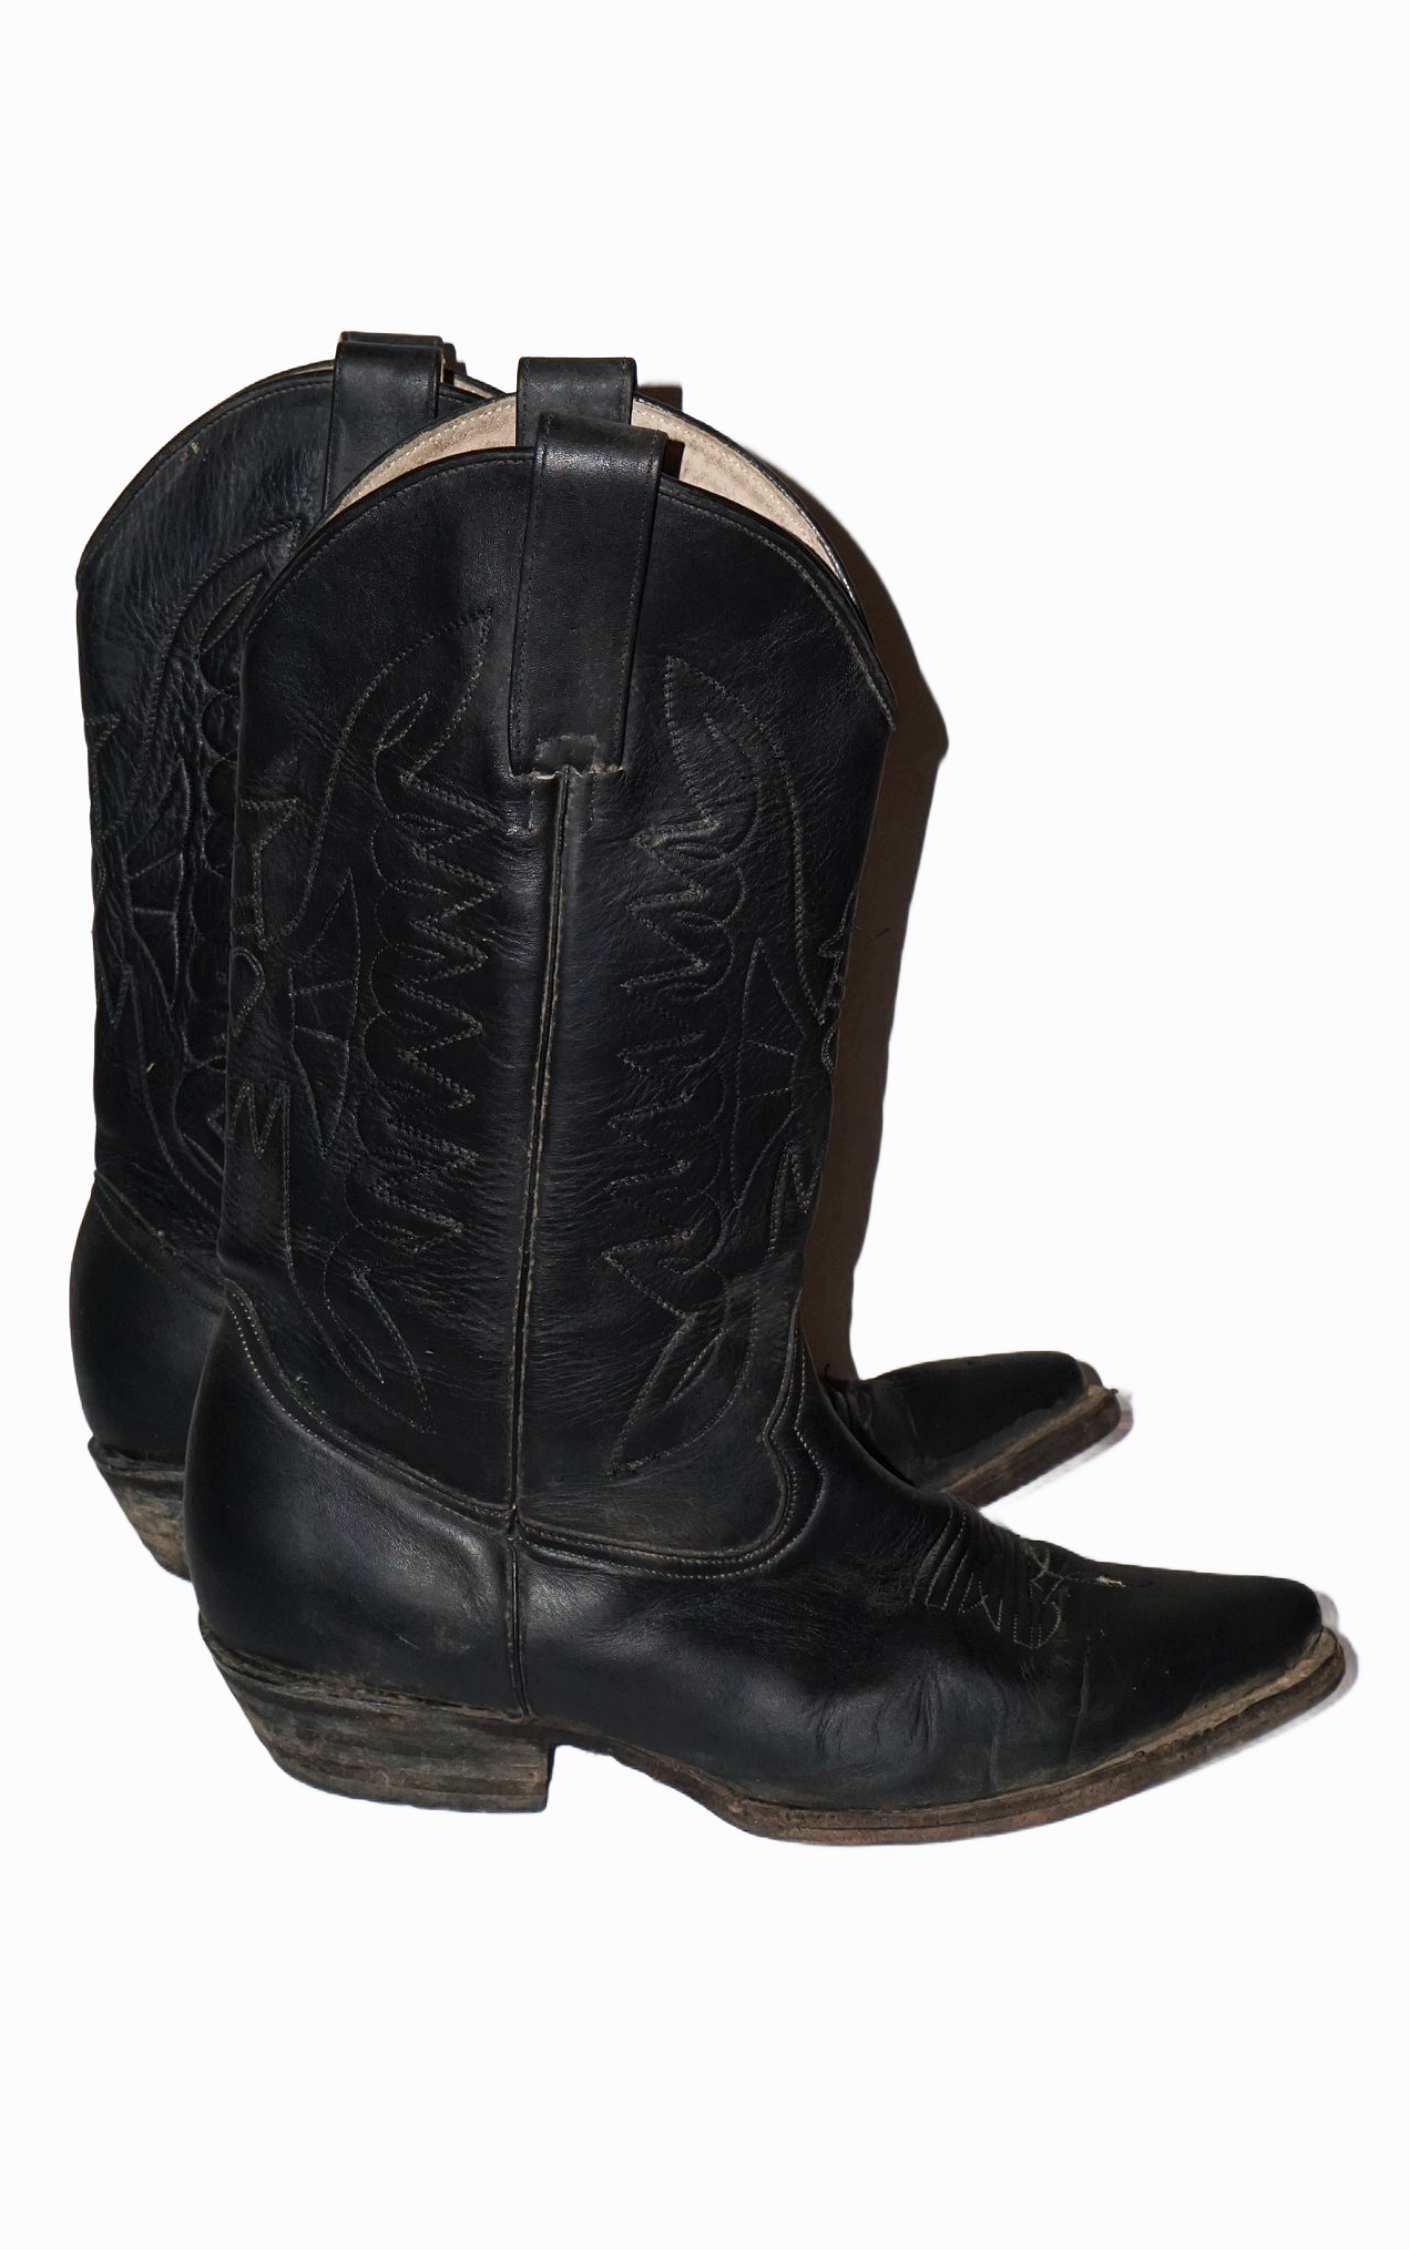 VINTAGE Black Leather Mid Calf Western Cowboy Riding Boots resellum